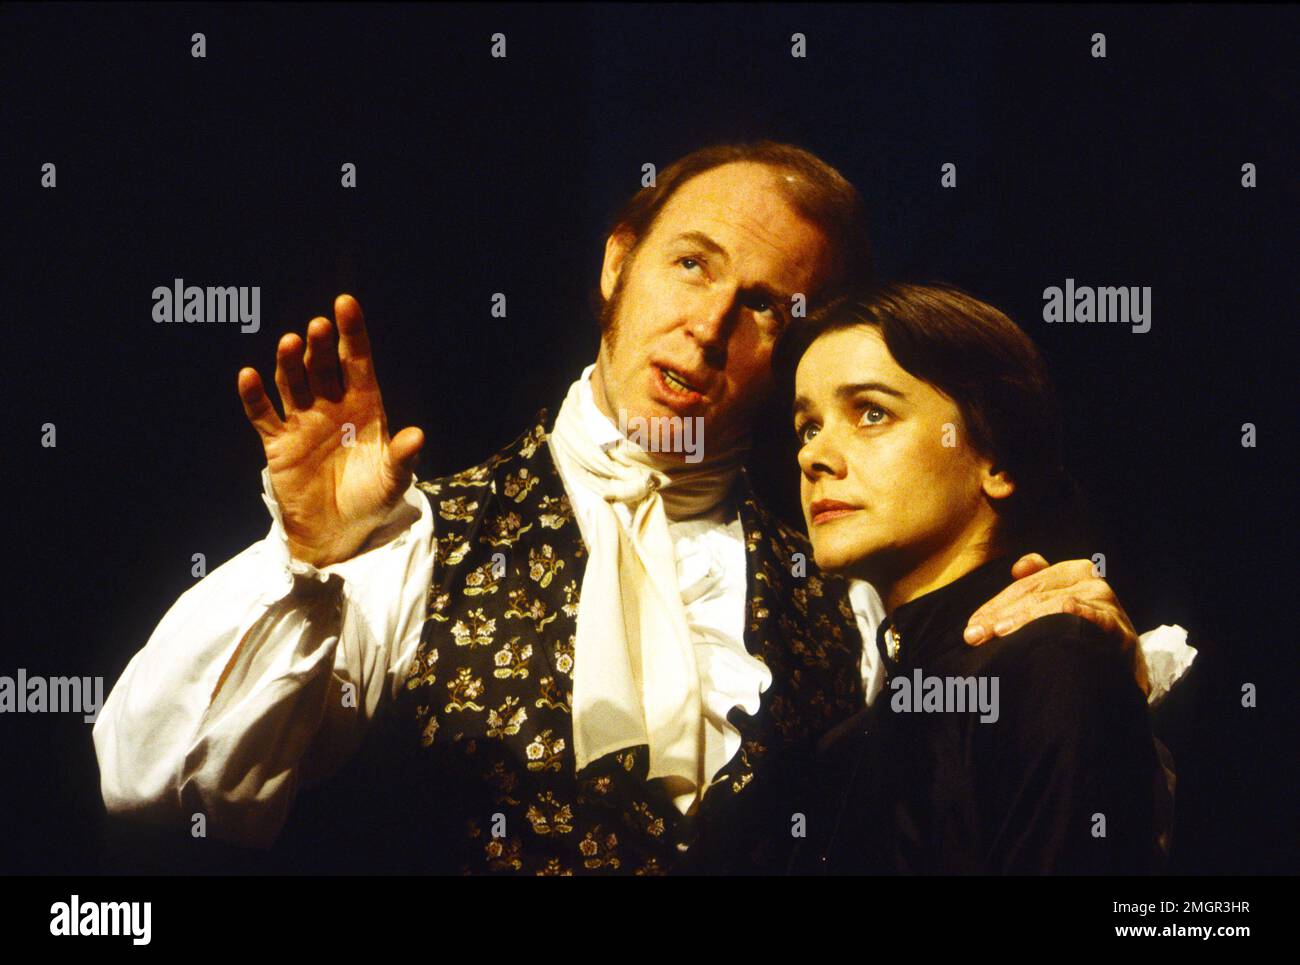 Tim Pigott-Smith (Mr Rochester), Alexandra Mathie (Jane Eyre) in JANE EYRE by Charlotte Bronte at the Playhouse Theatre, London WC2  07/12/1993  adapted for the stage by Fay Weldon  design: Lez Brotherston  lighting: Nick Beadle  director: Helena Kaut-Howson Stock Photo